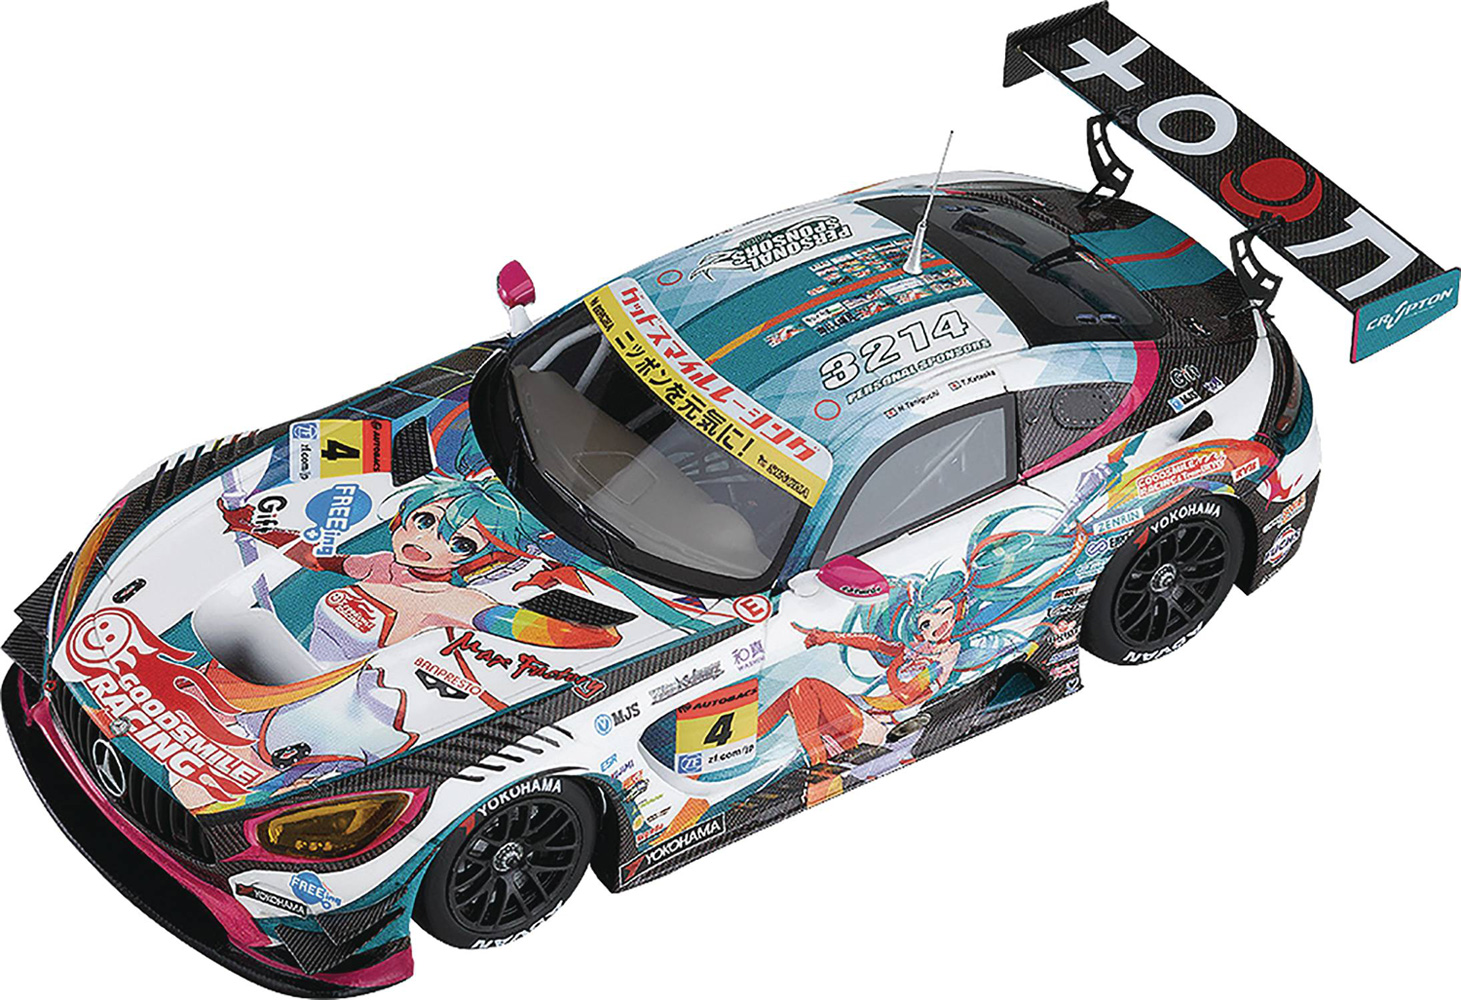 Image: Hatsune Miku GT Project Mini Car Amg  (2016 opening version) (1/43 scale) - Good Smile Racing